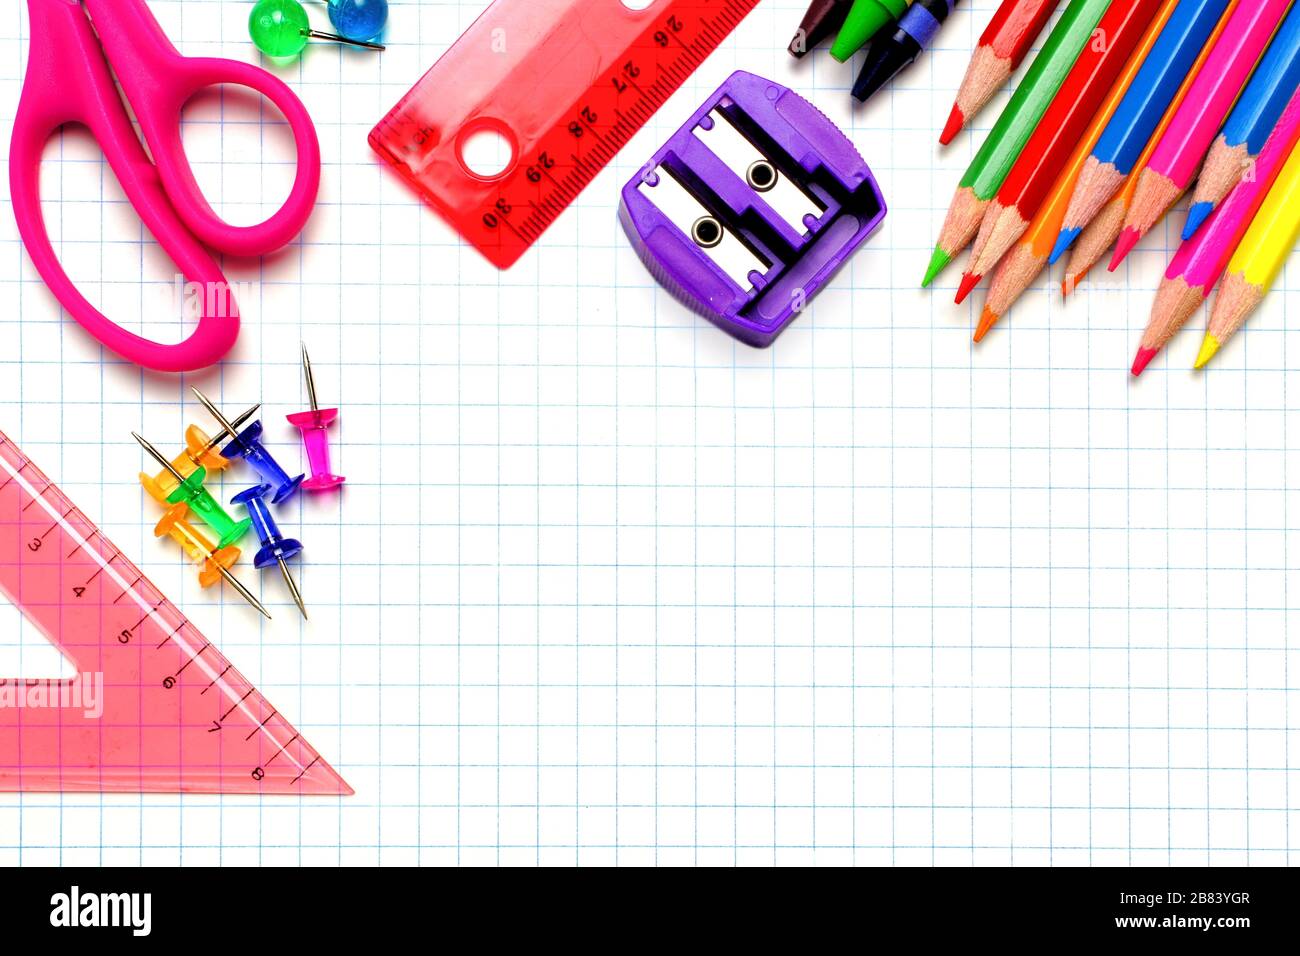 Colorful school supplies corner border over a graphing paper background Stock Photo